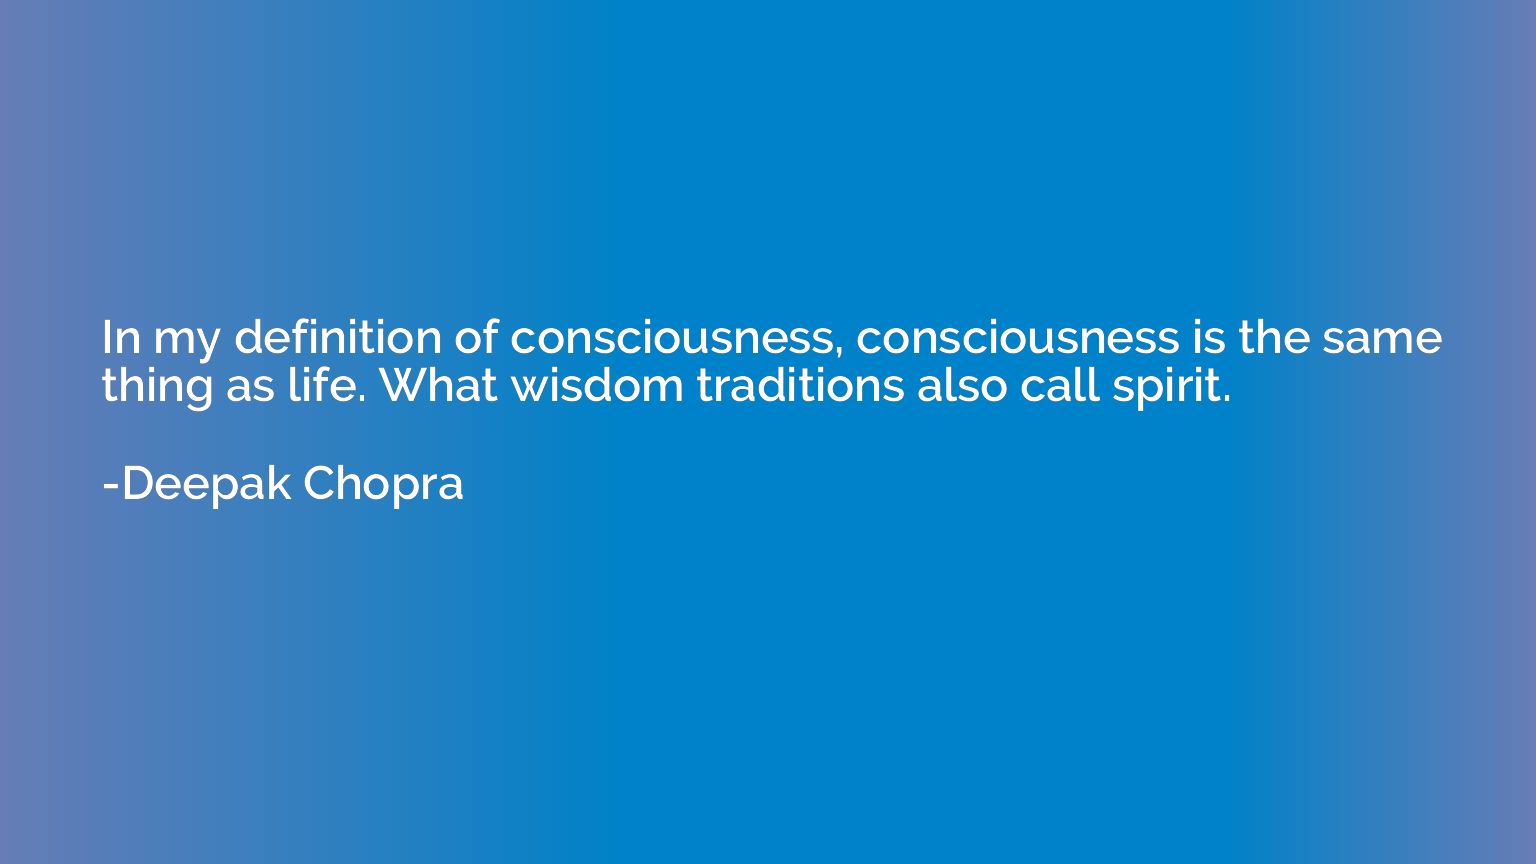 In my definition of consciousness, consciousness is the same